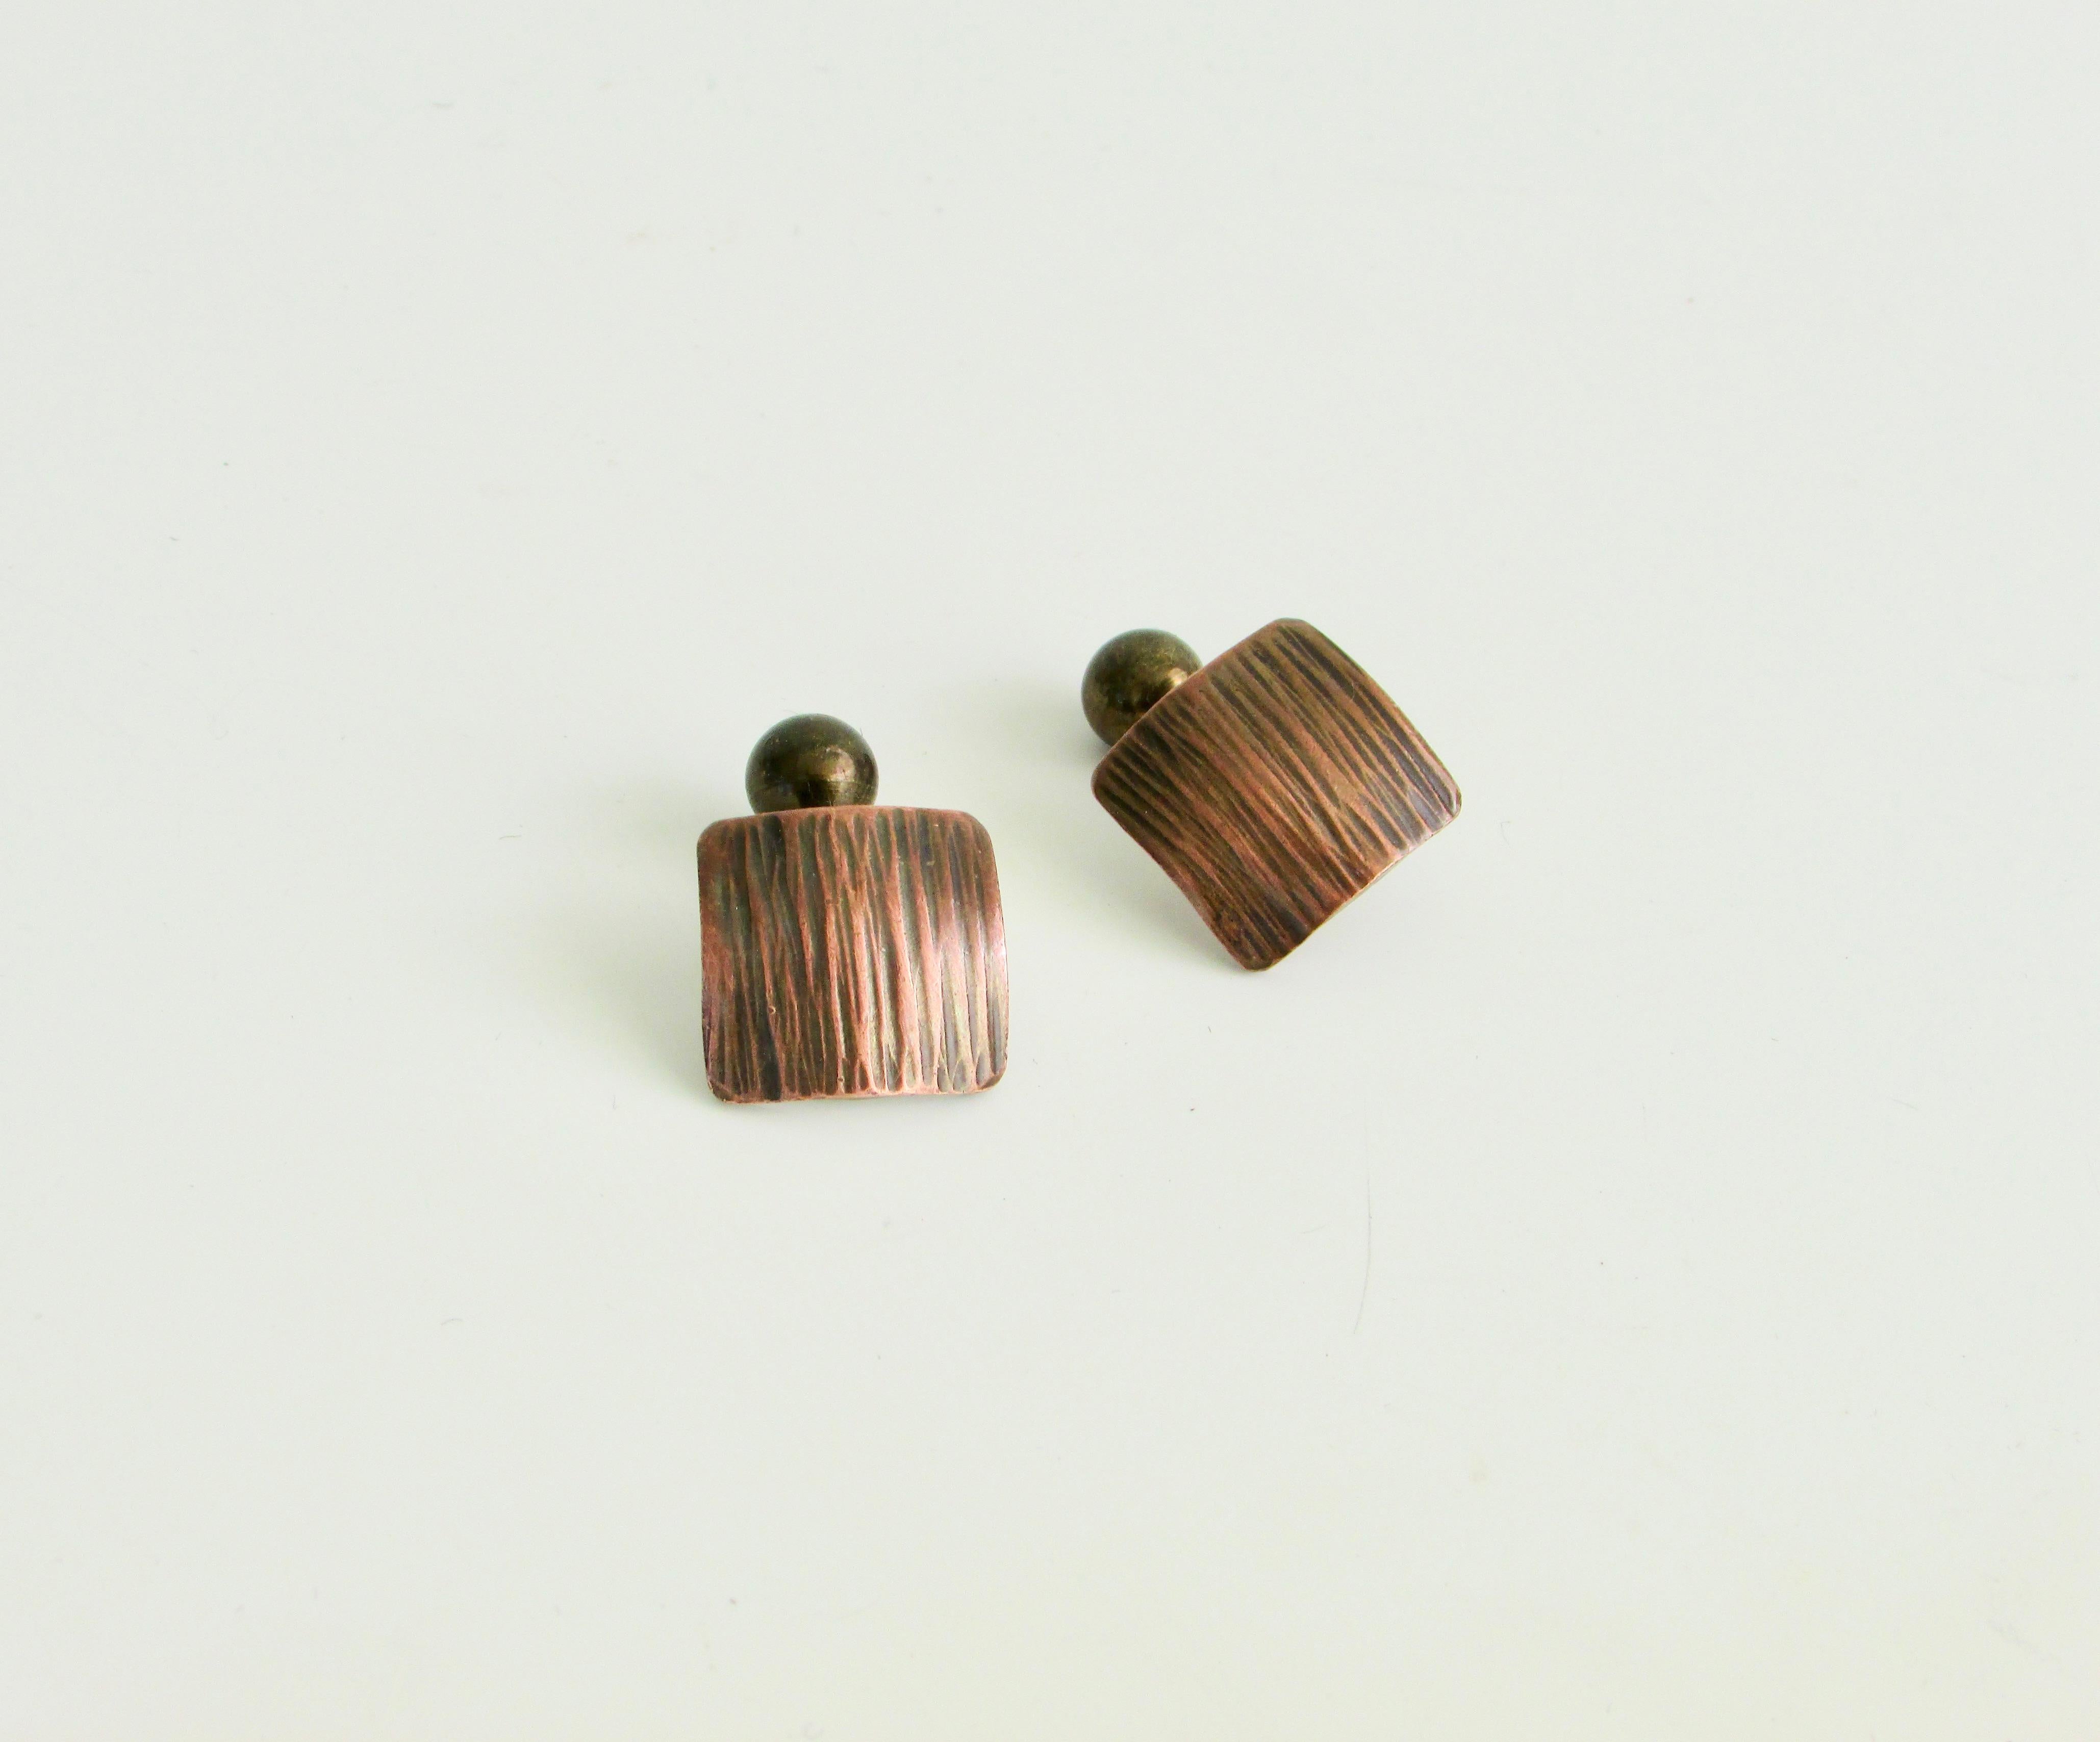 Nicely crafted pair of cuff links by and signed Rebaje . Hammered copper face with brass button on backside . 
Francisco Torres arrived in NY from Dominican Republic in 1922. Sleeping on couches and in basements of friends trying to make his fortune